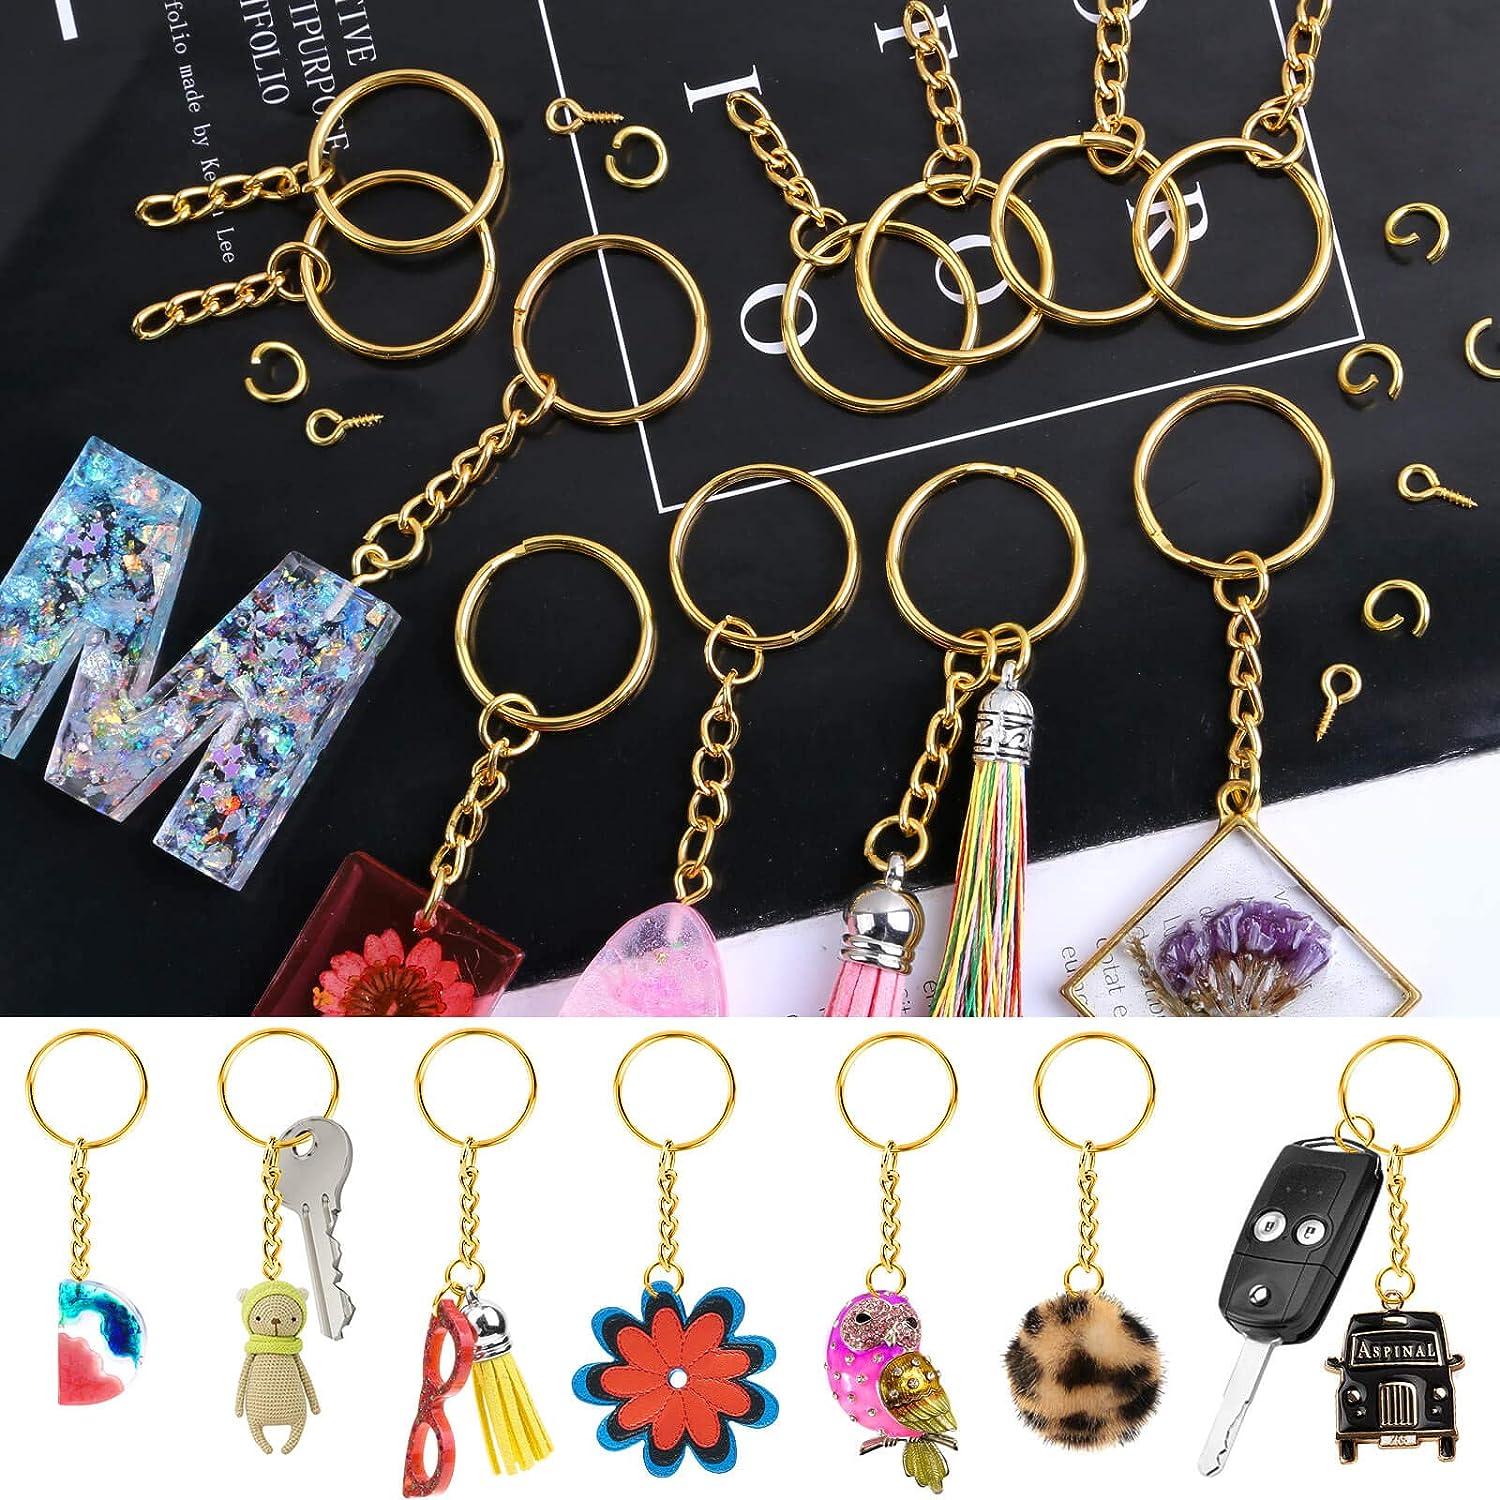 AUGSUN 600pcs Key Chain Rings,200Pcs 25mm Keychain Rings with Chain and 200pcs Jump Rings with 200pcs Screw Eye Pins for Resin,Crafts and Keychains